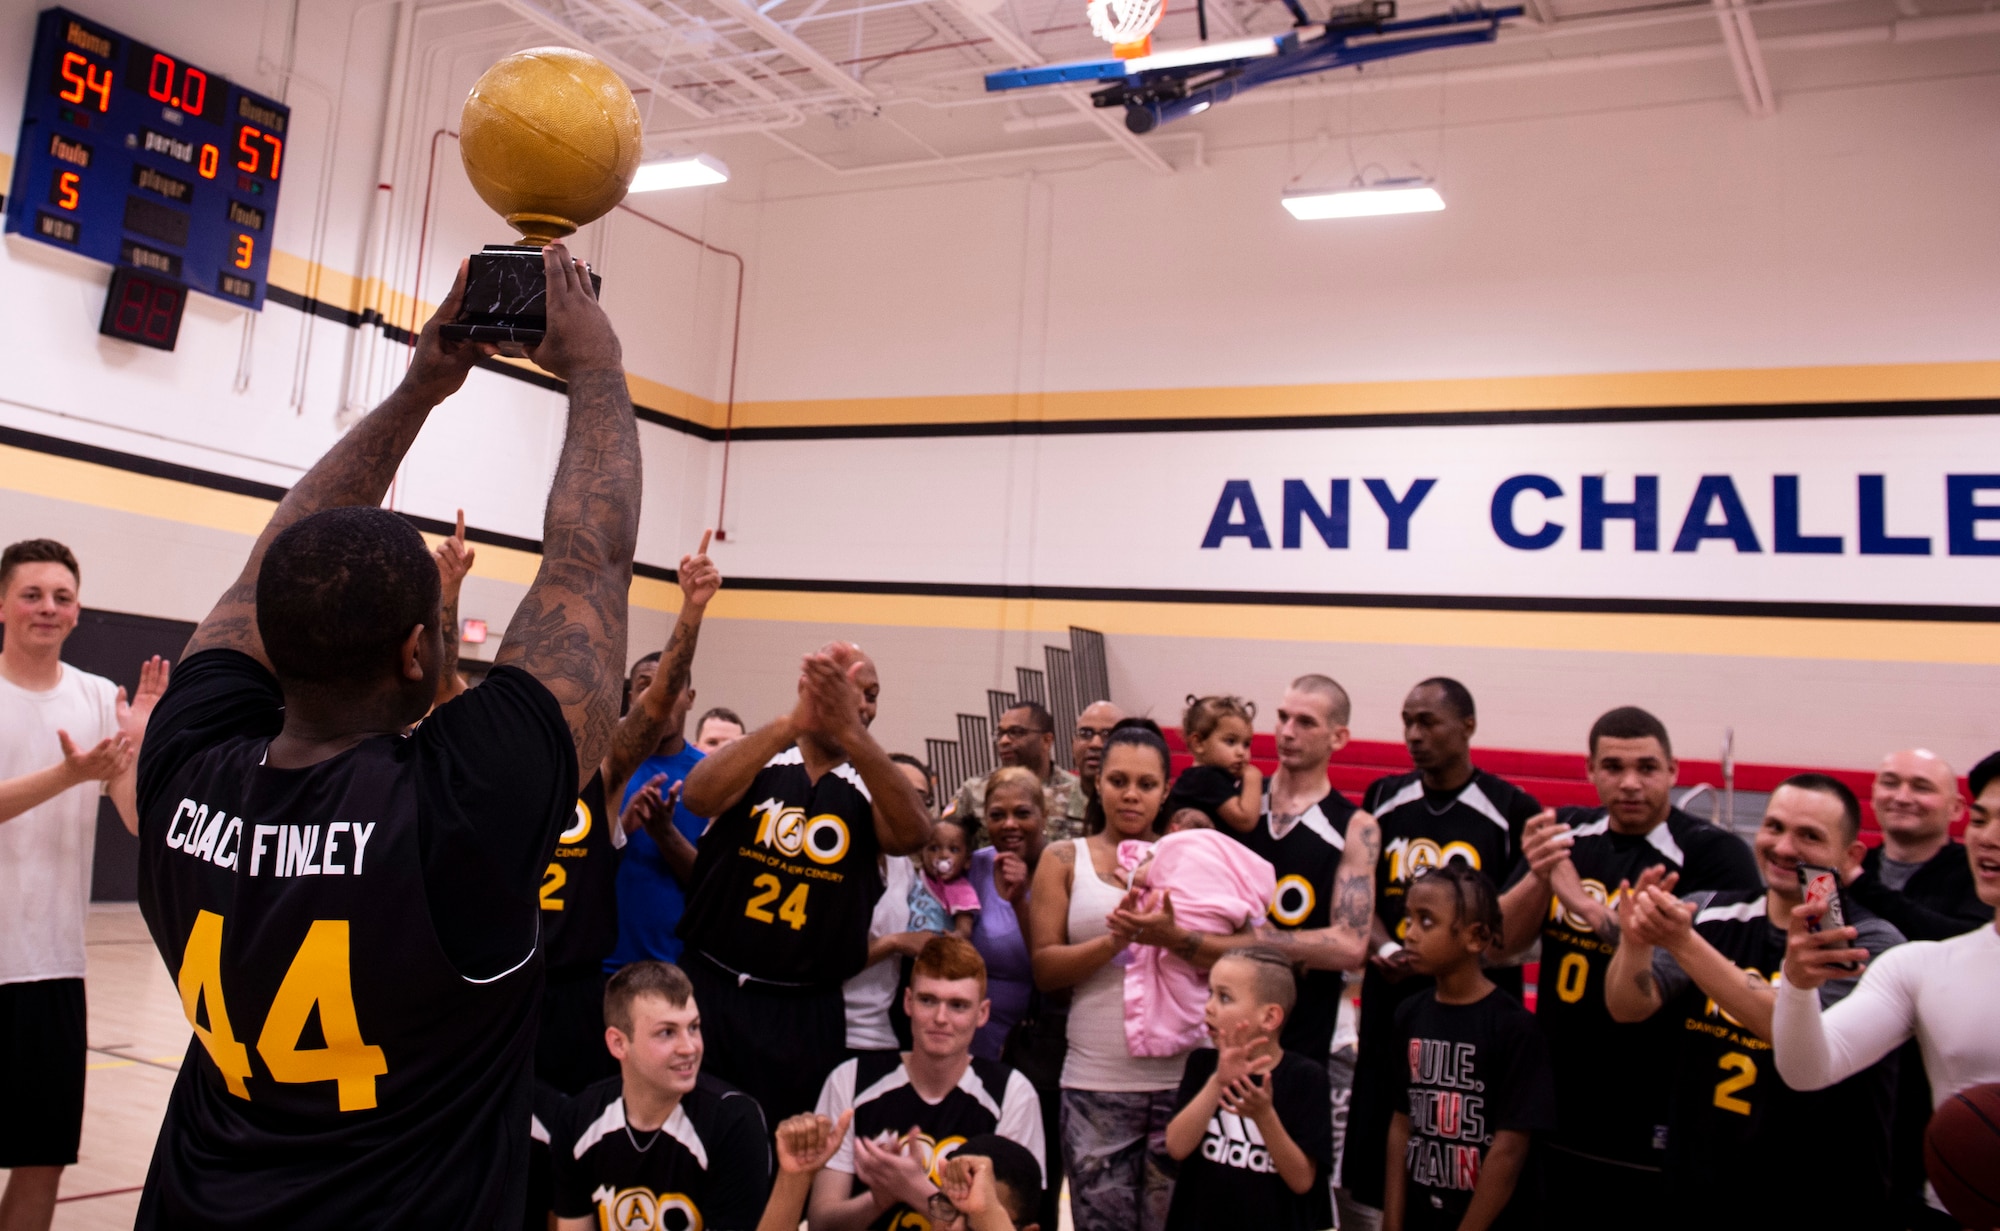 The coach of team U.S. Army Central Command (ARCENT) holds up a trophy following the completion of an intramural basketball championship game at Shaw Air Force Base, S.C., March 14, 2019.